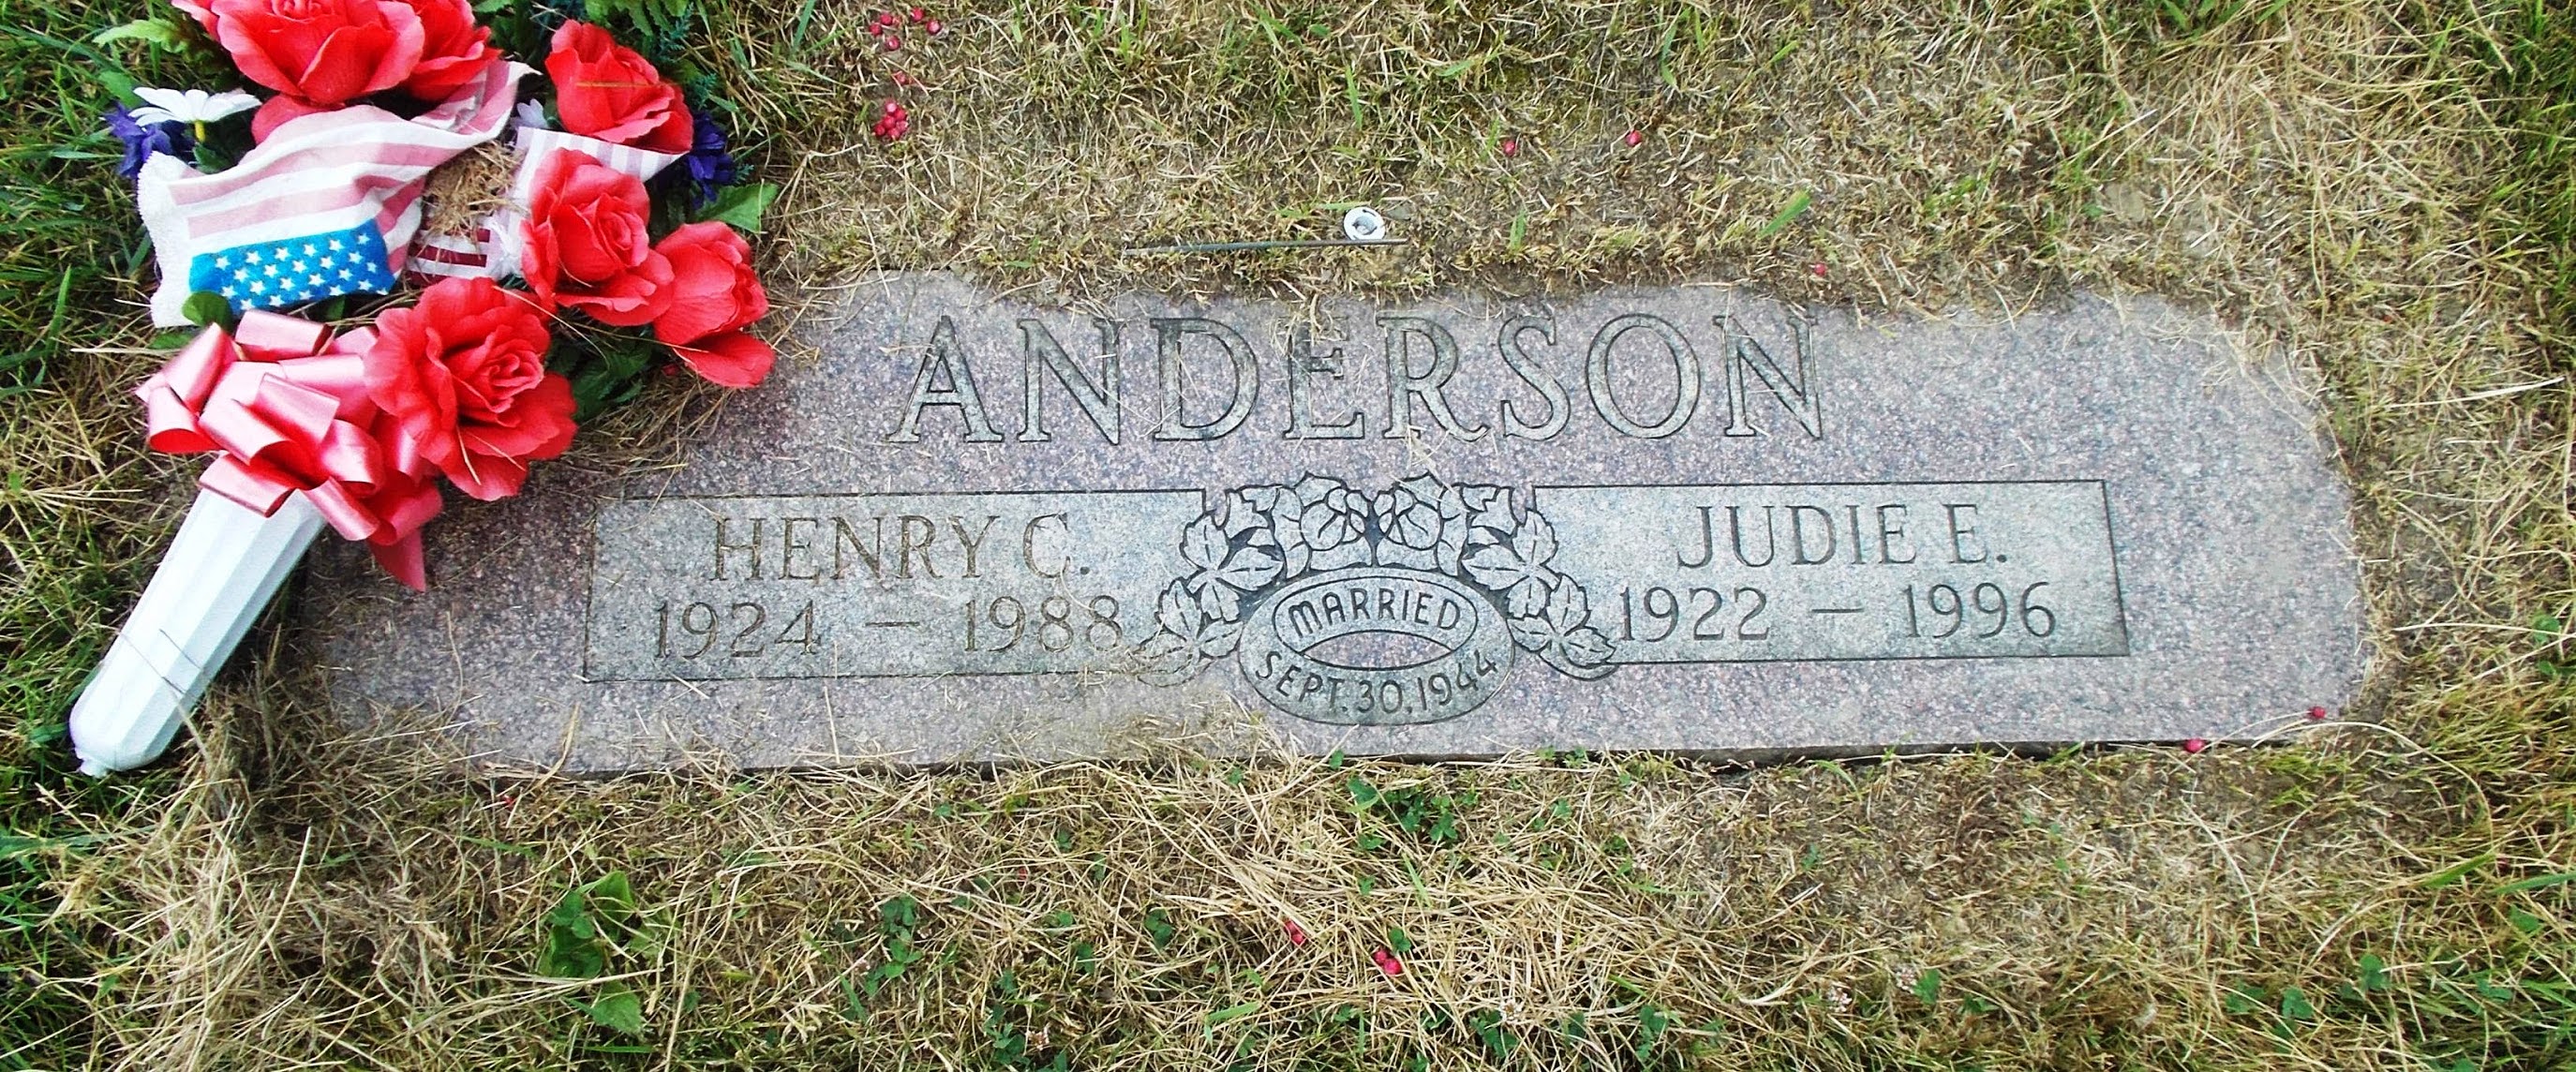 Henry C Anderson